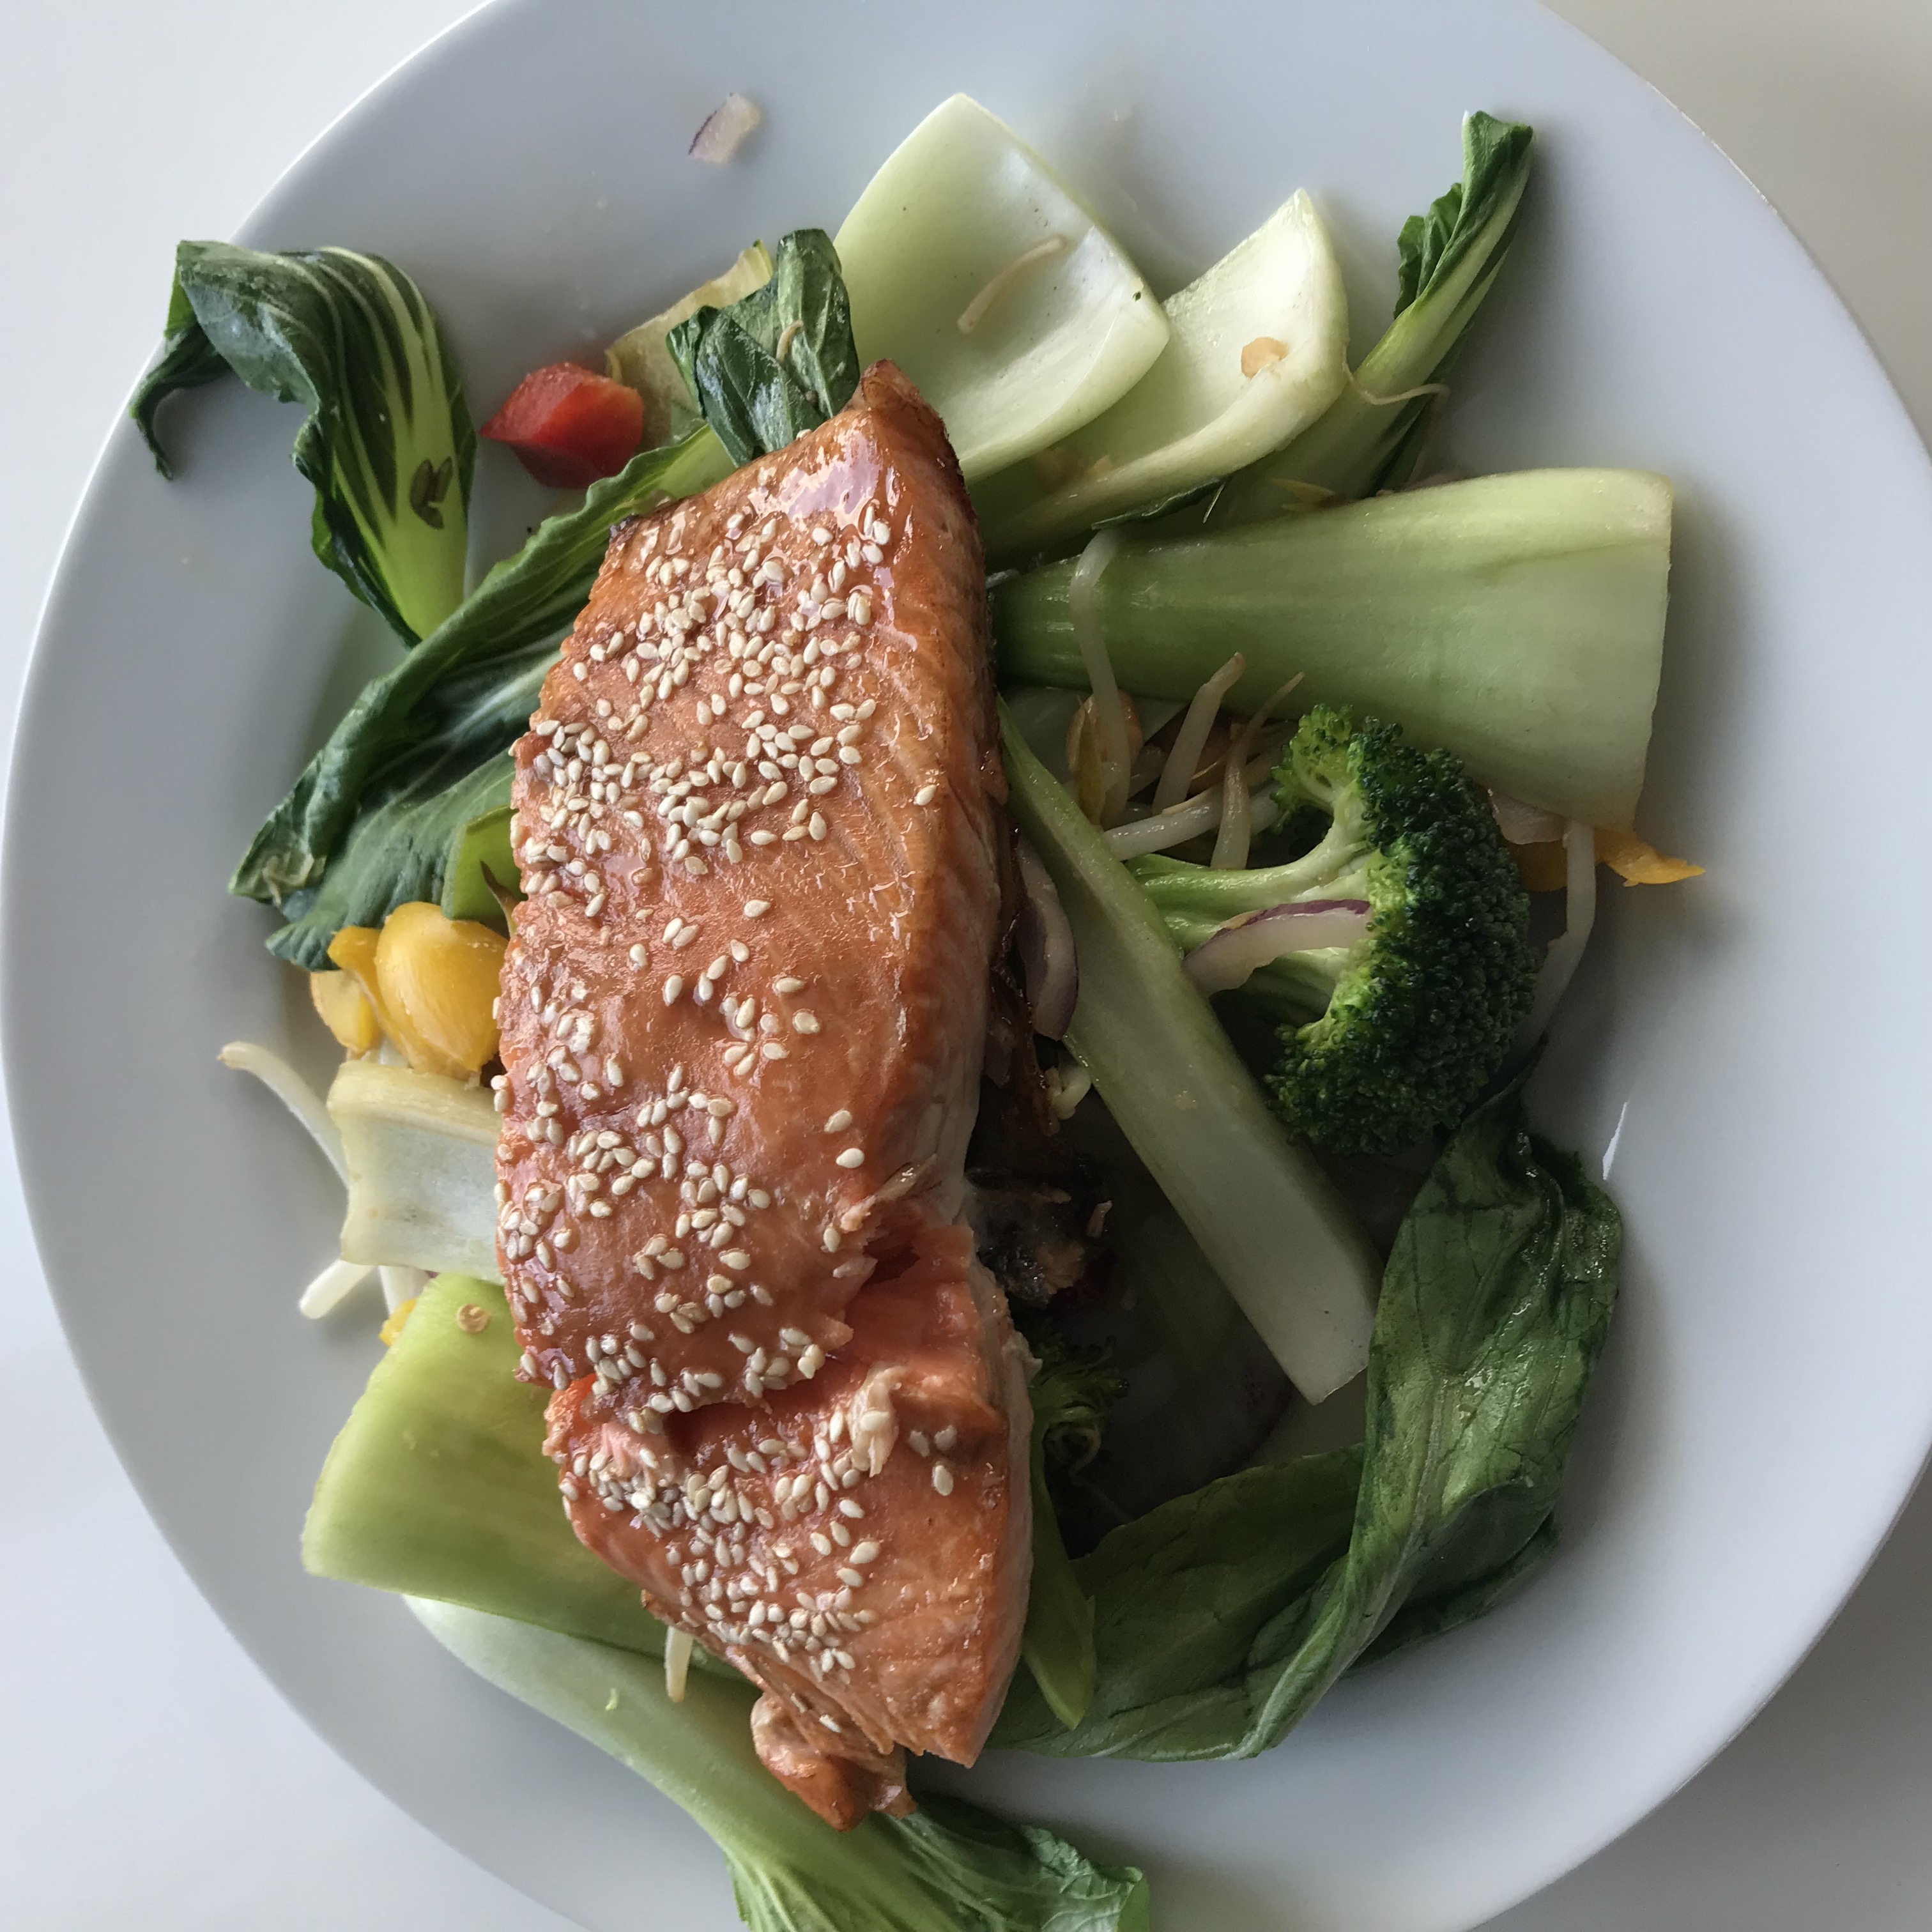 Sesame Seed Roasted Salmon with Stir-fried Vegetables